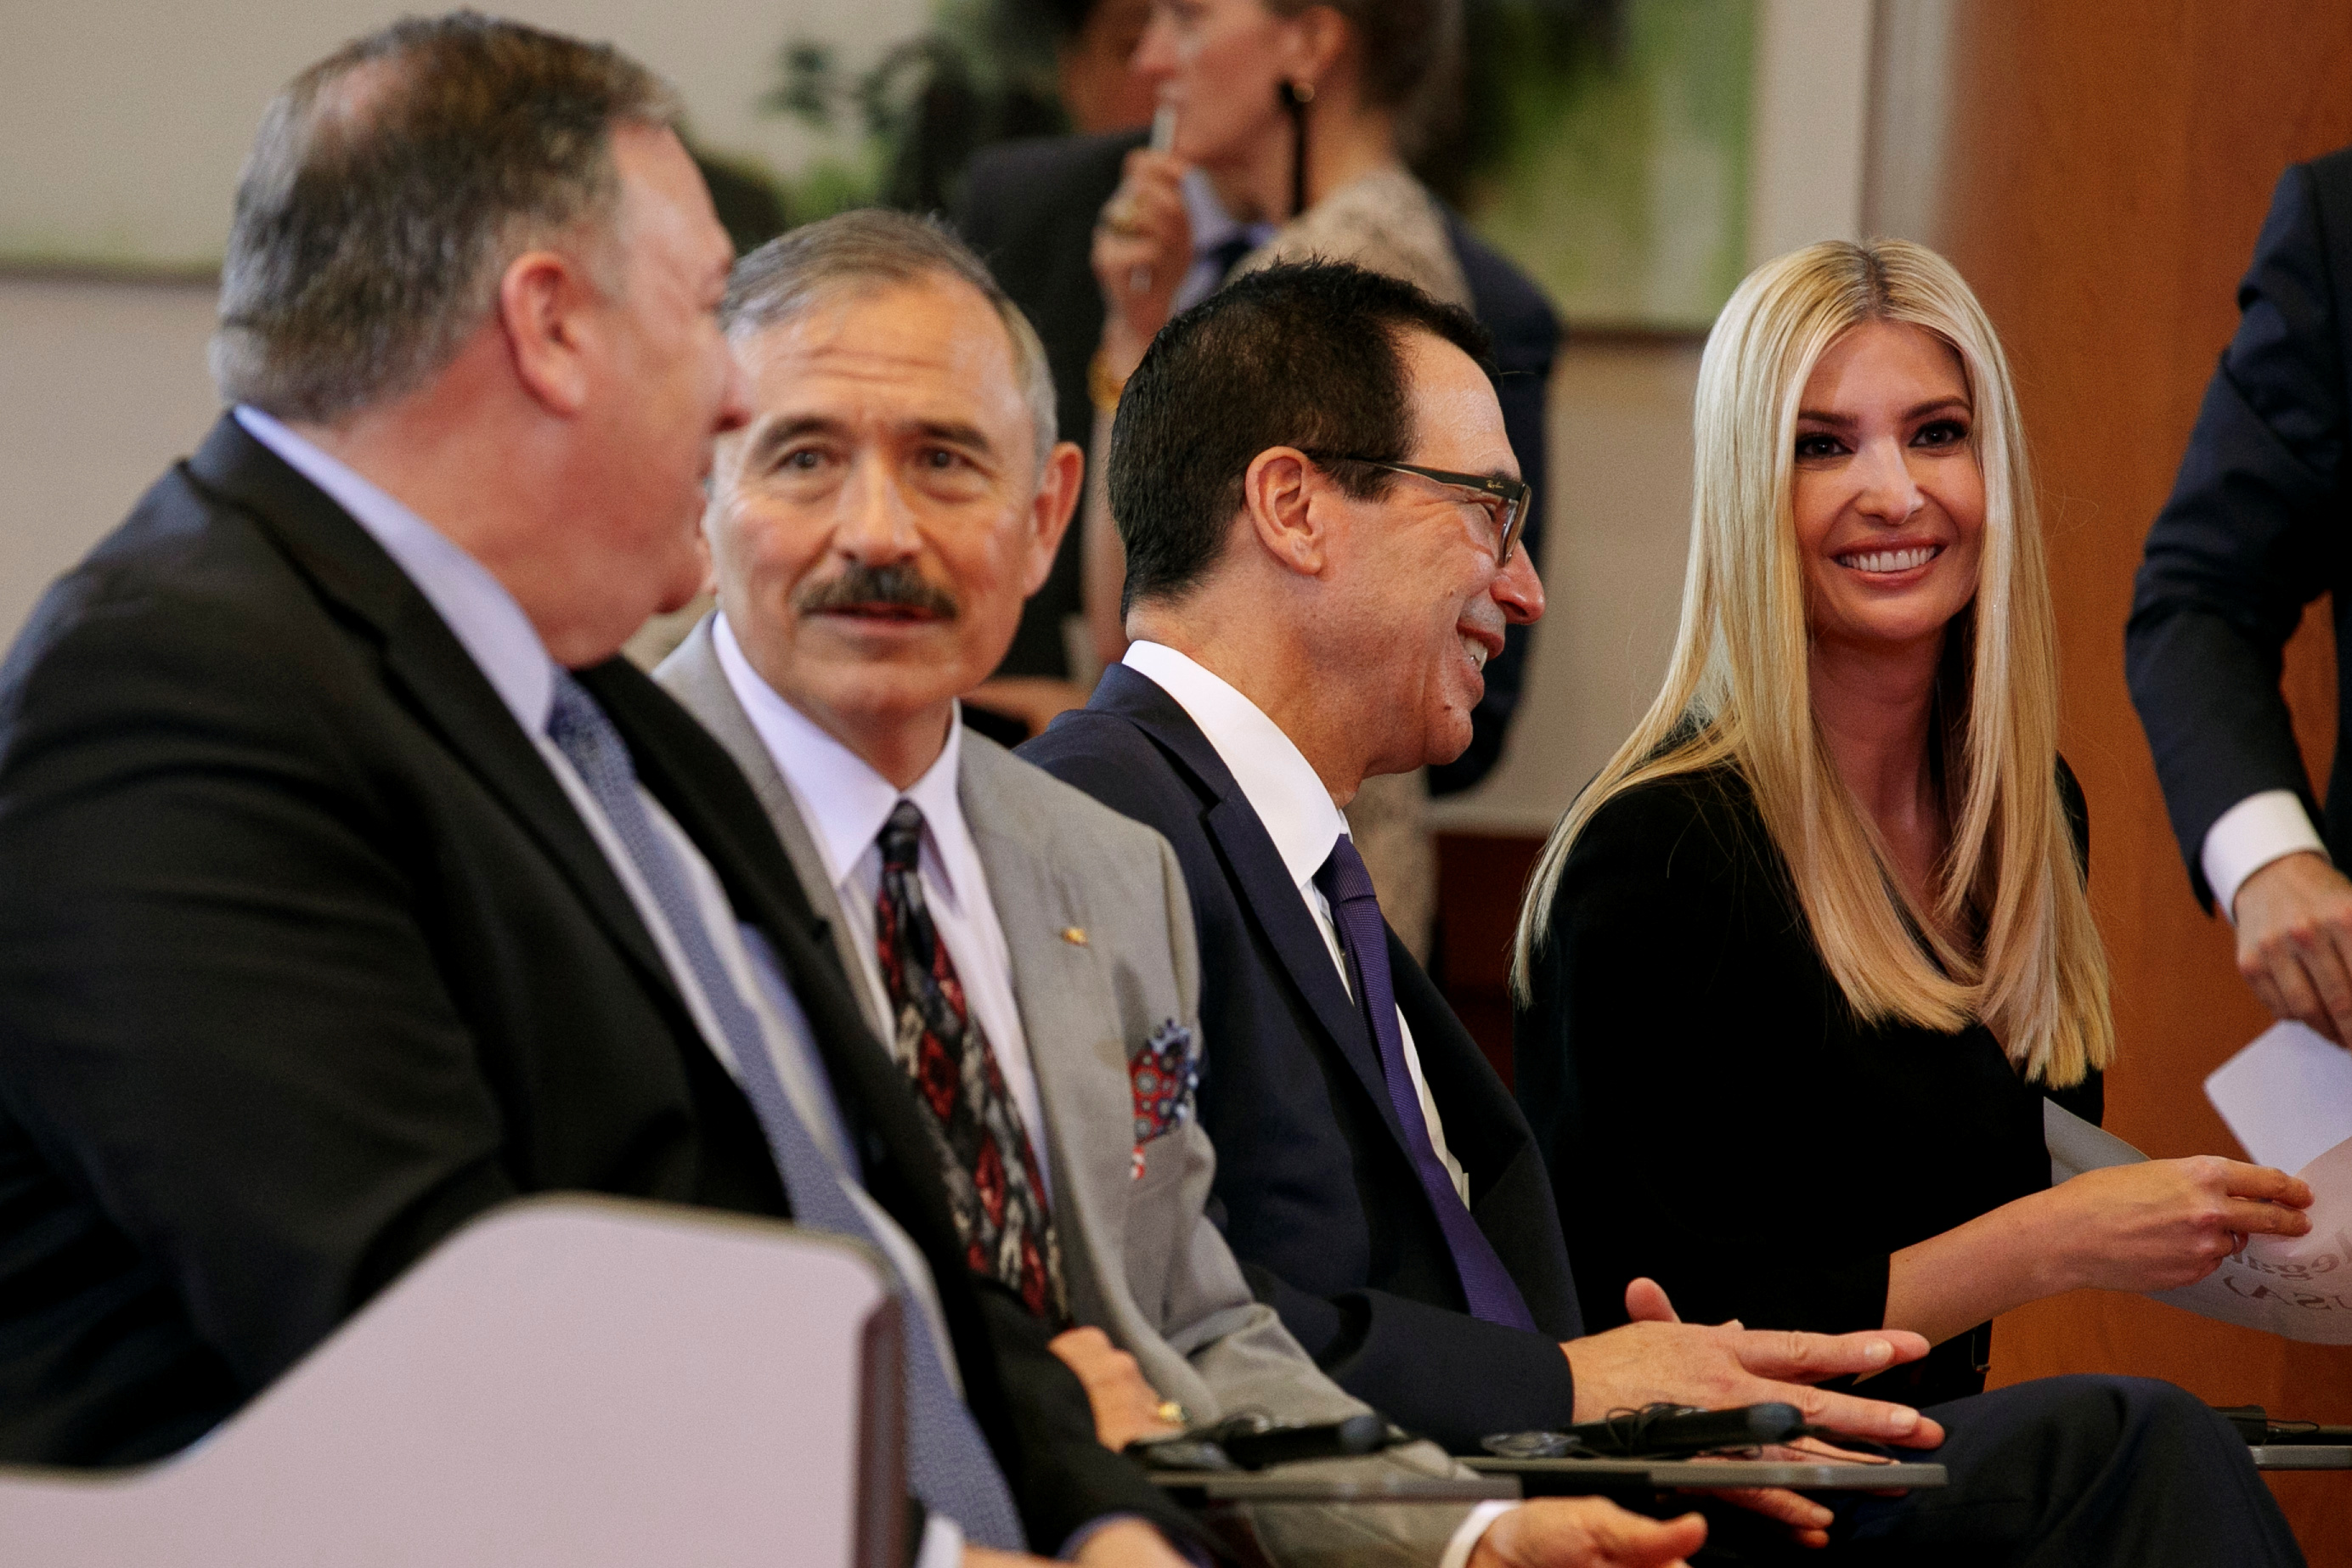 U.S. Secretary of State Mike Pompeo, left, U.S. Ambassador to South Korea Harry Harris, Treasury Secretary Steve Mnuchin, and White House Adviser Ivanka Trump, chat together before a news conference by President Donald Trump and South Korean President Moon Jae-in, at Blue House, in Seoul, South Korea, Sunday, June 30, 2019, before heading to the demilitarized zone. Photo taken June 30, 2019. Jacquelyn Martin/Pool via REUTERS